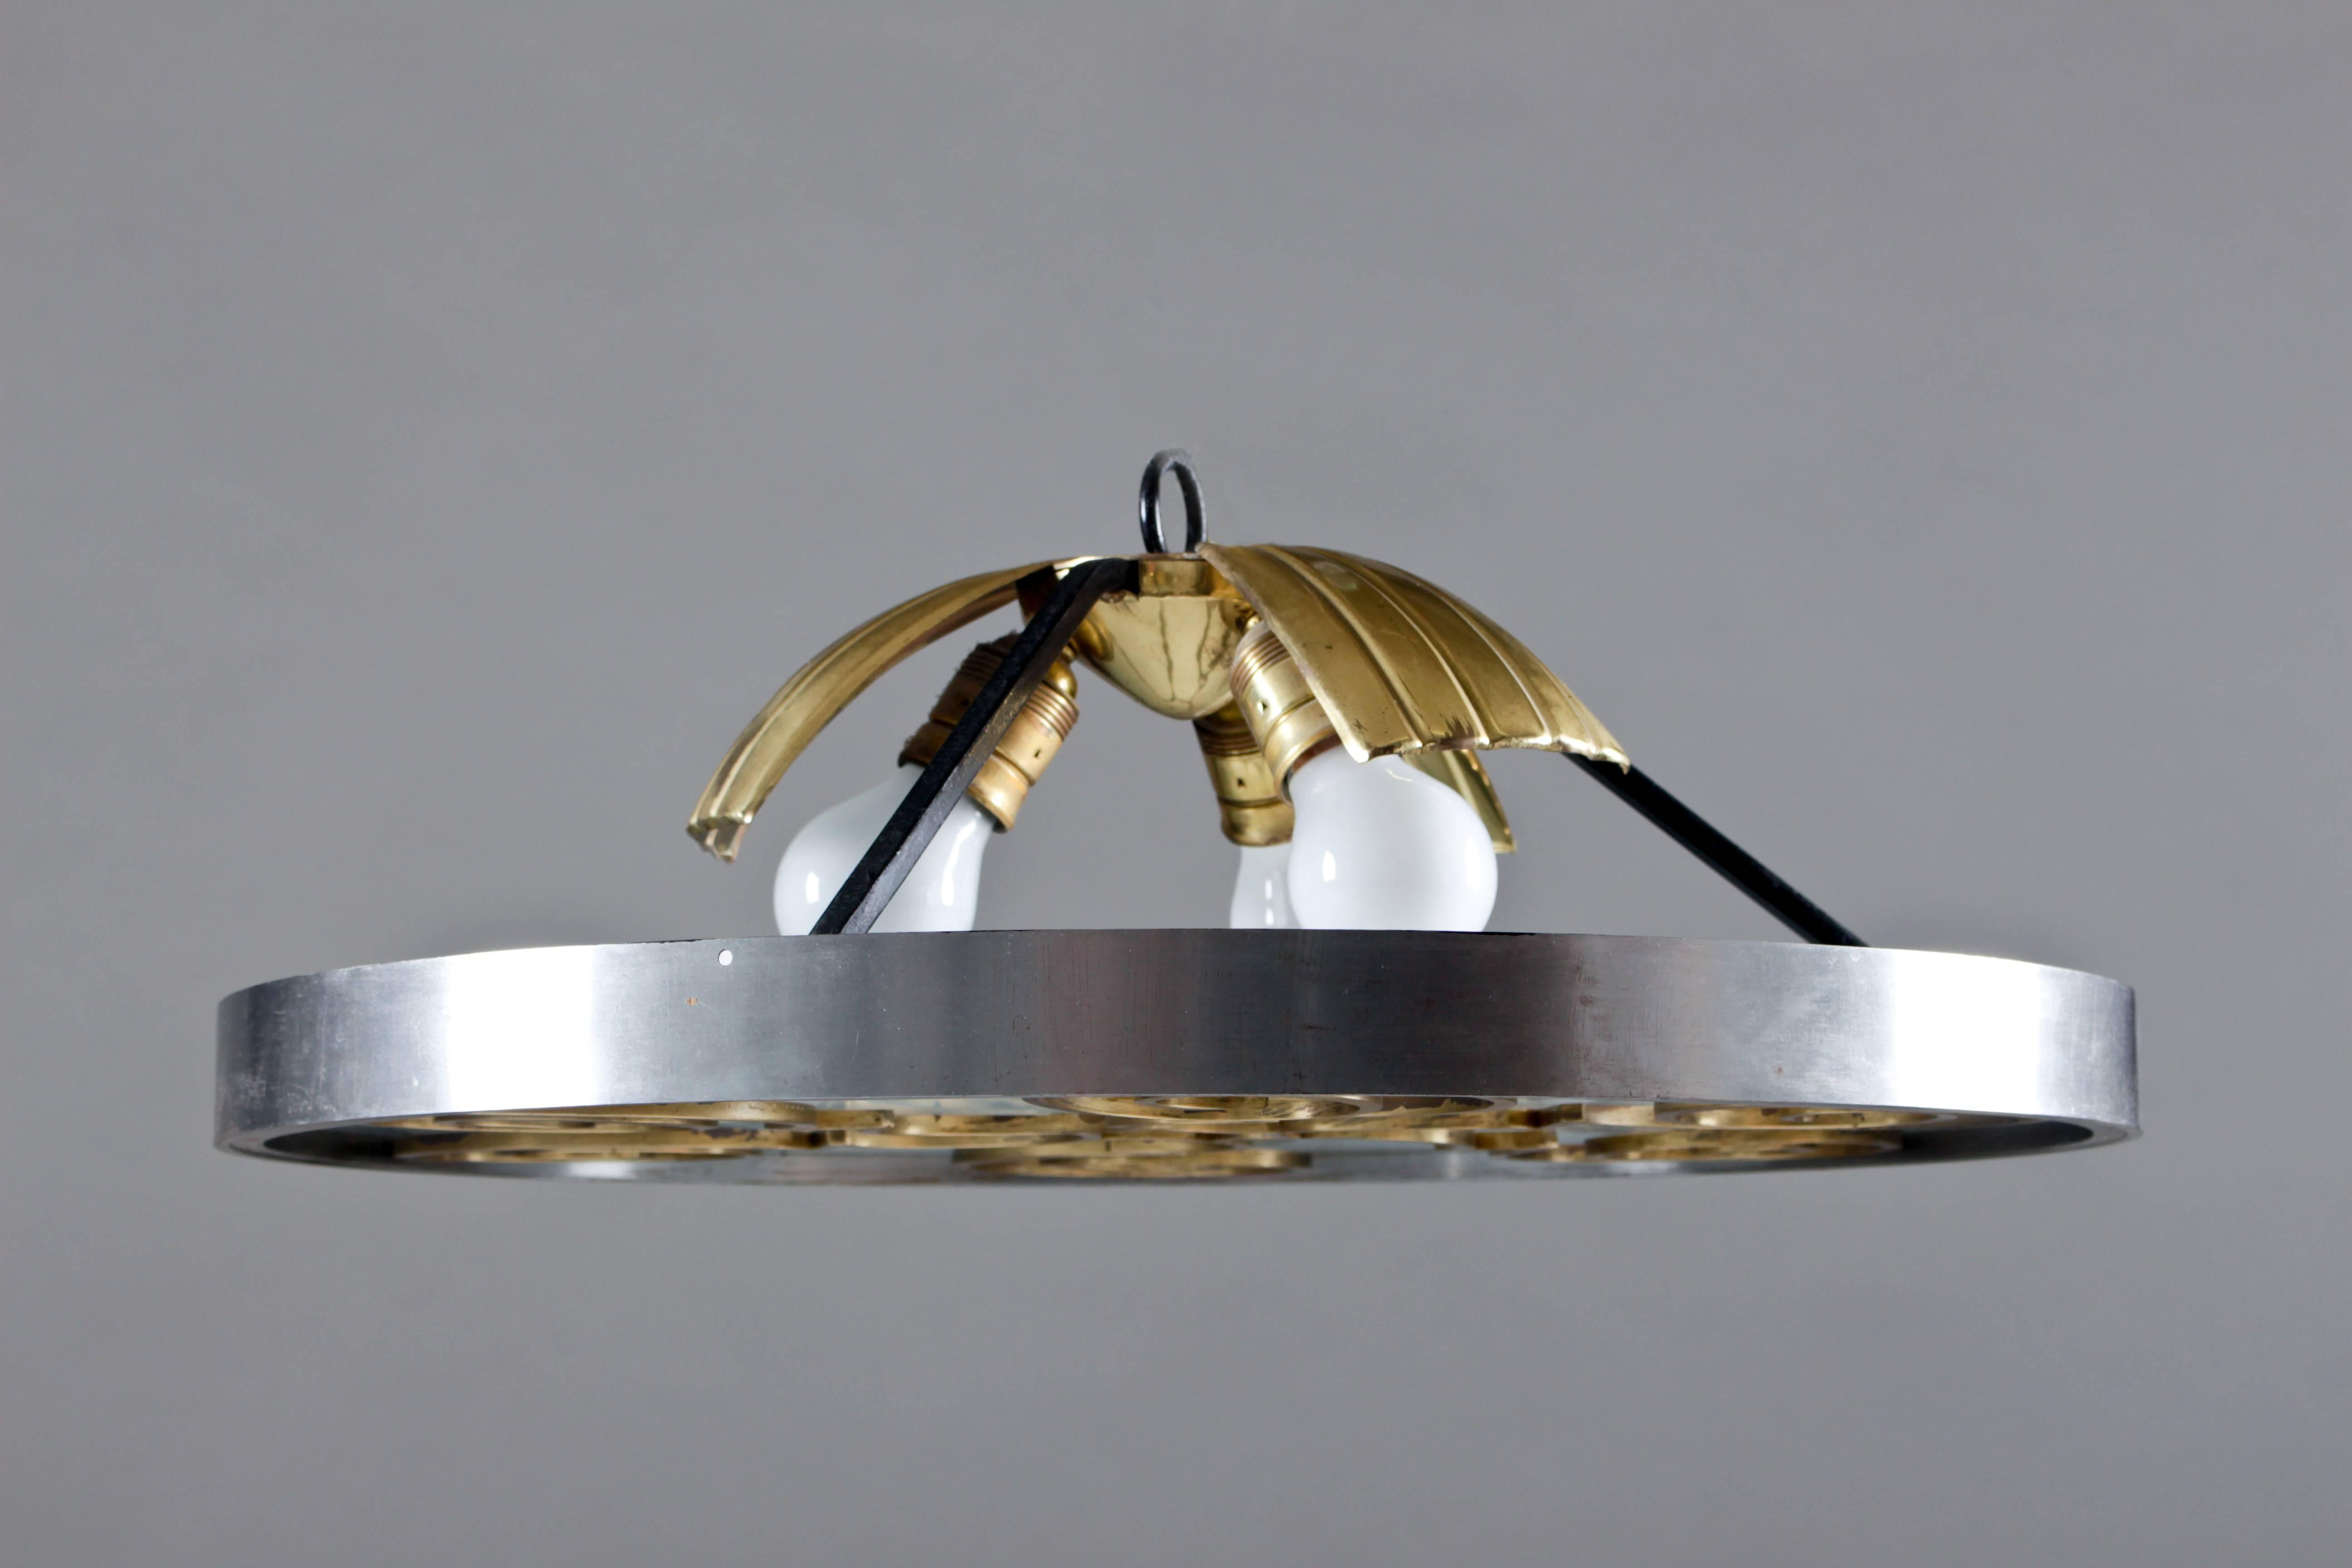 Art Deco flush mount by Lars Holmström Arvika made of brass, steel and frosted glass.
The lamp was bought from the designer himself. Later, the lamp was repaired (the glass was replaced); an invoice is included with the autograph of Lars